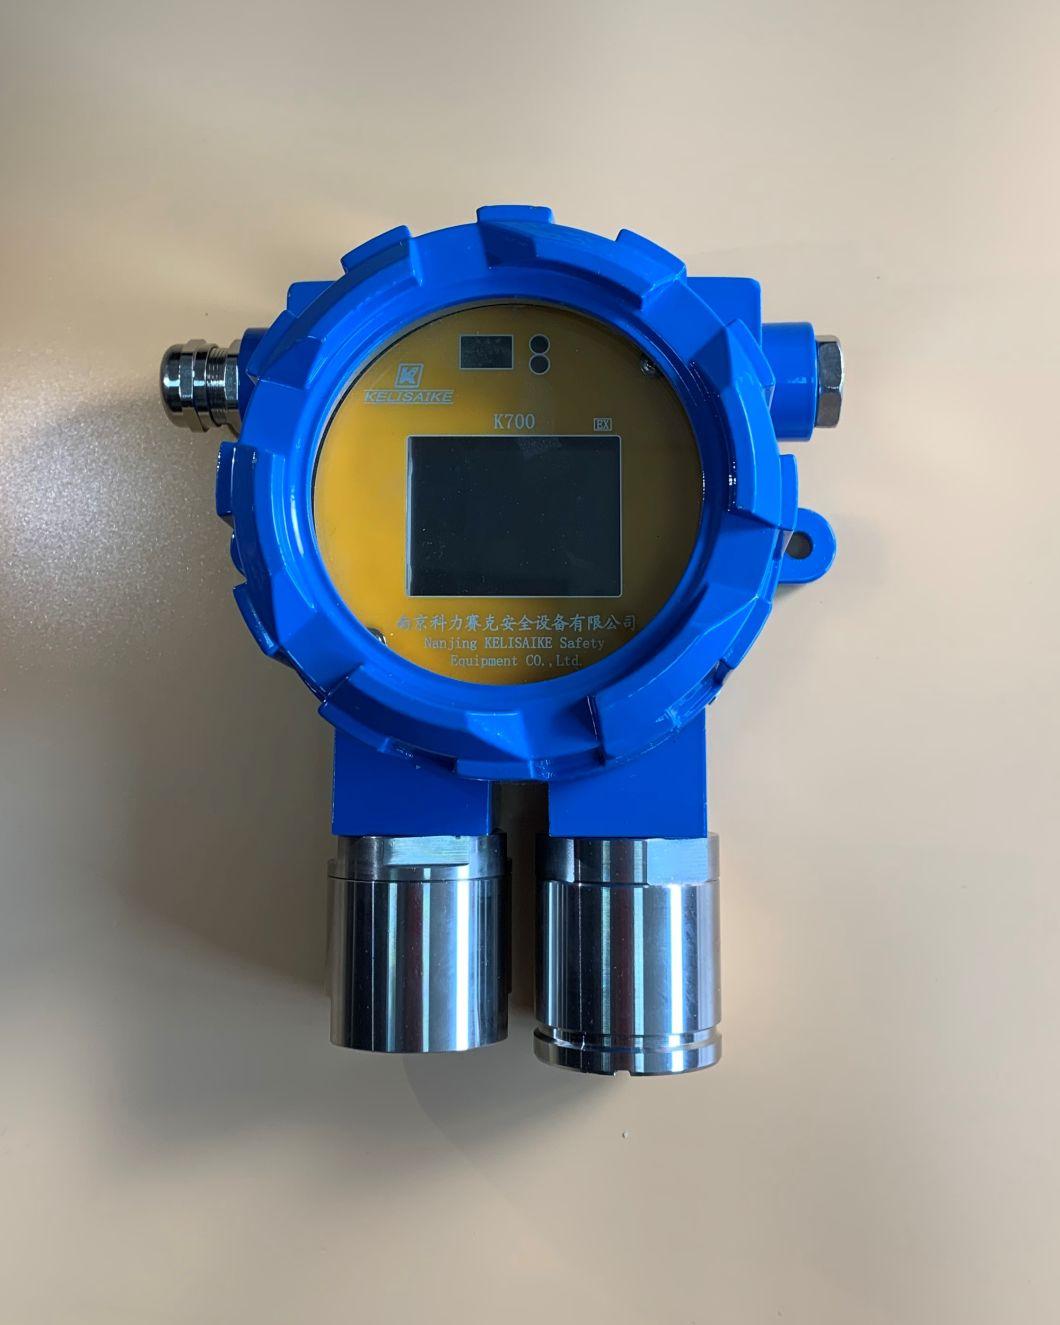 K700 Fixed Gas Detector with Visual Alarm Lamp